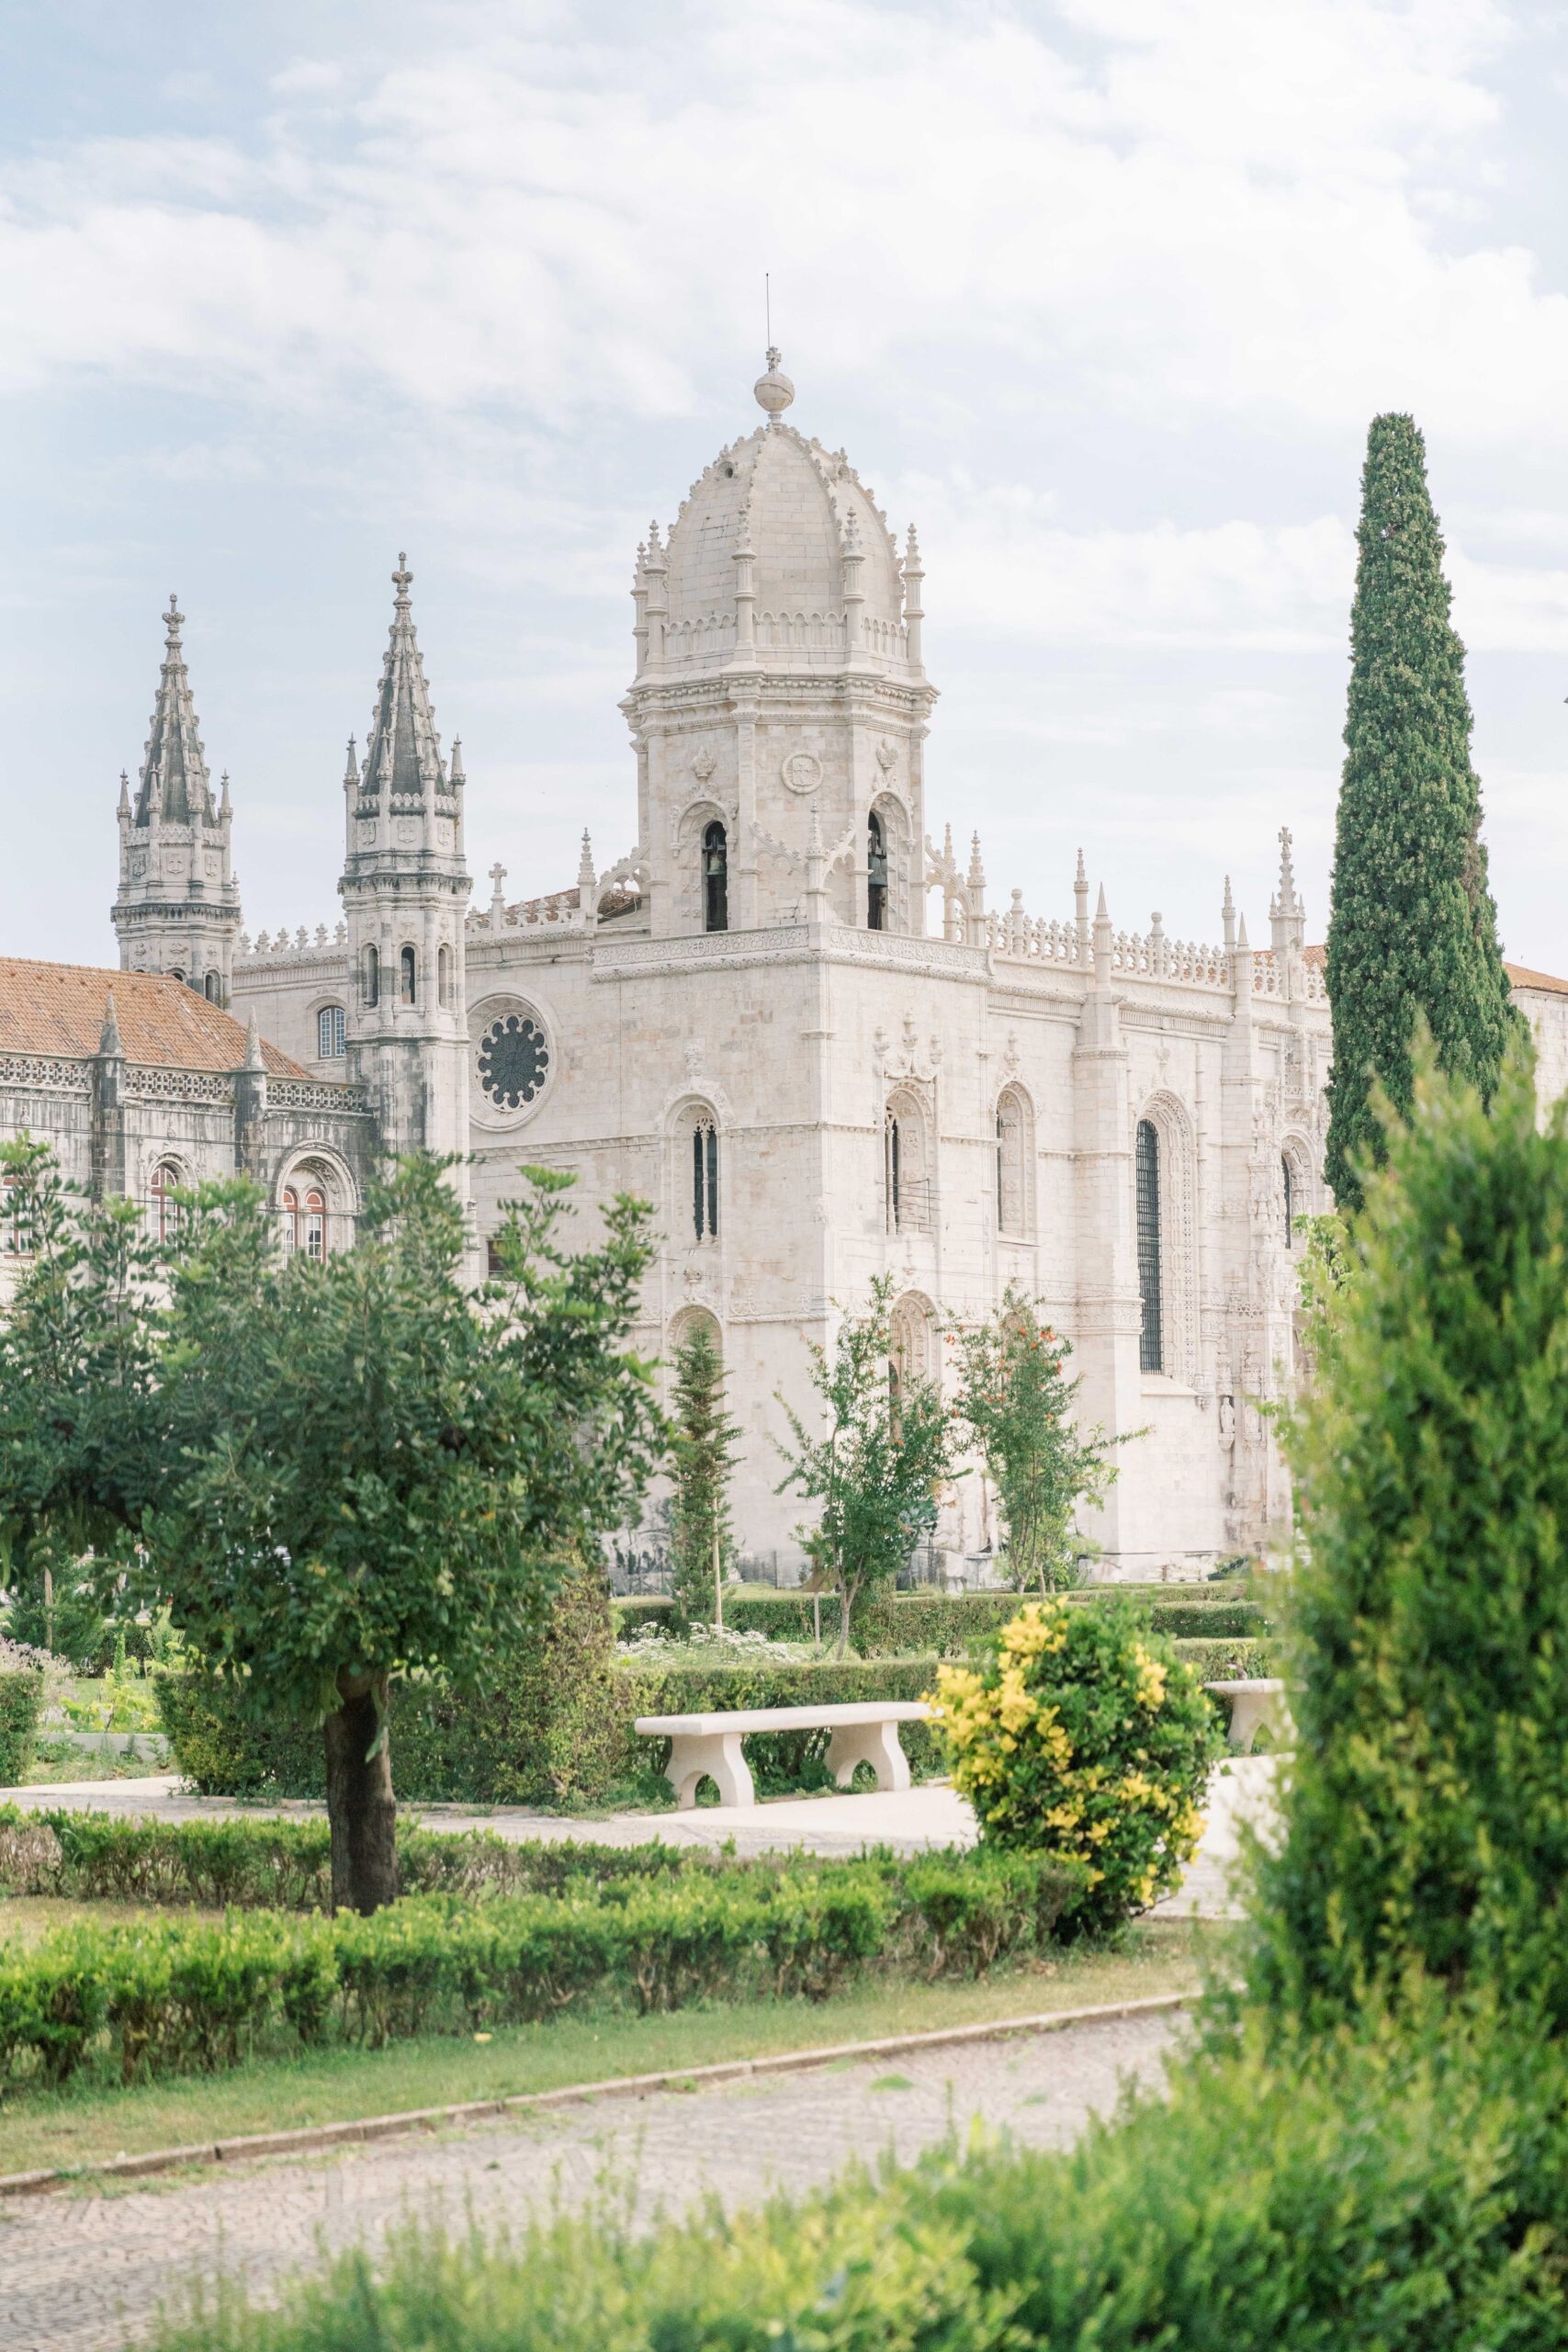 A travel vacation guide to Lisbon, Sintra, and the Algarve region of Portugal, along with a day trip to Seville!